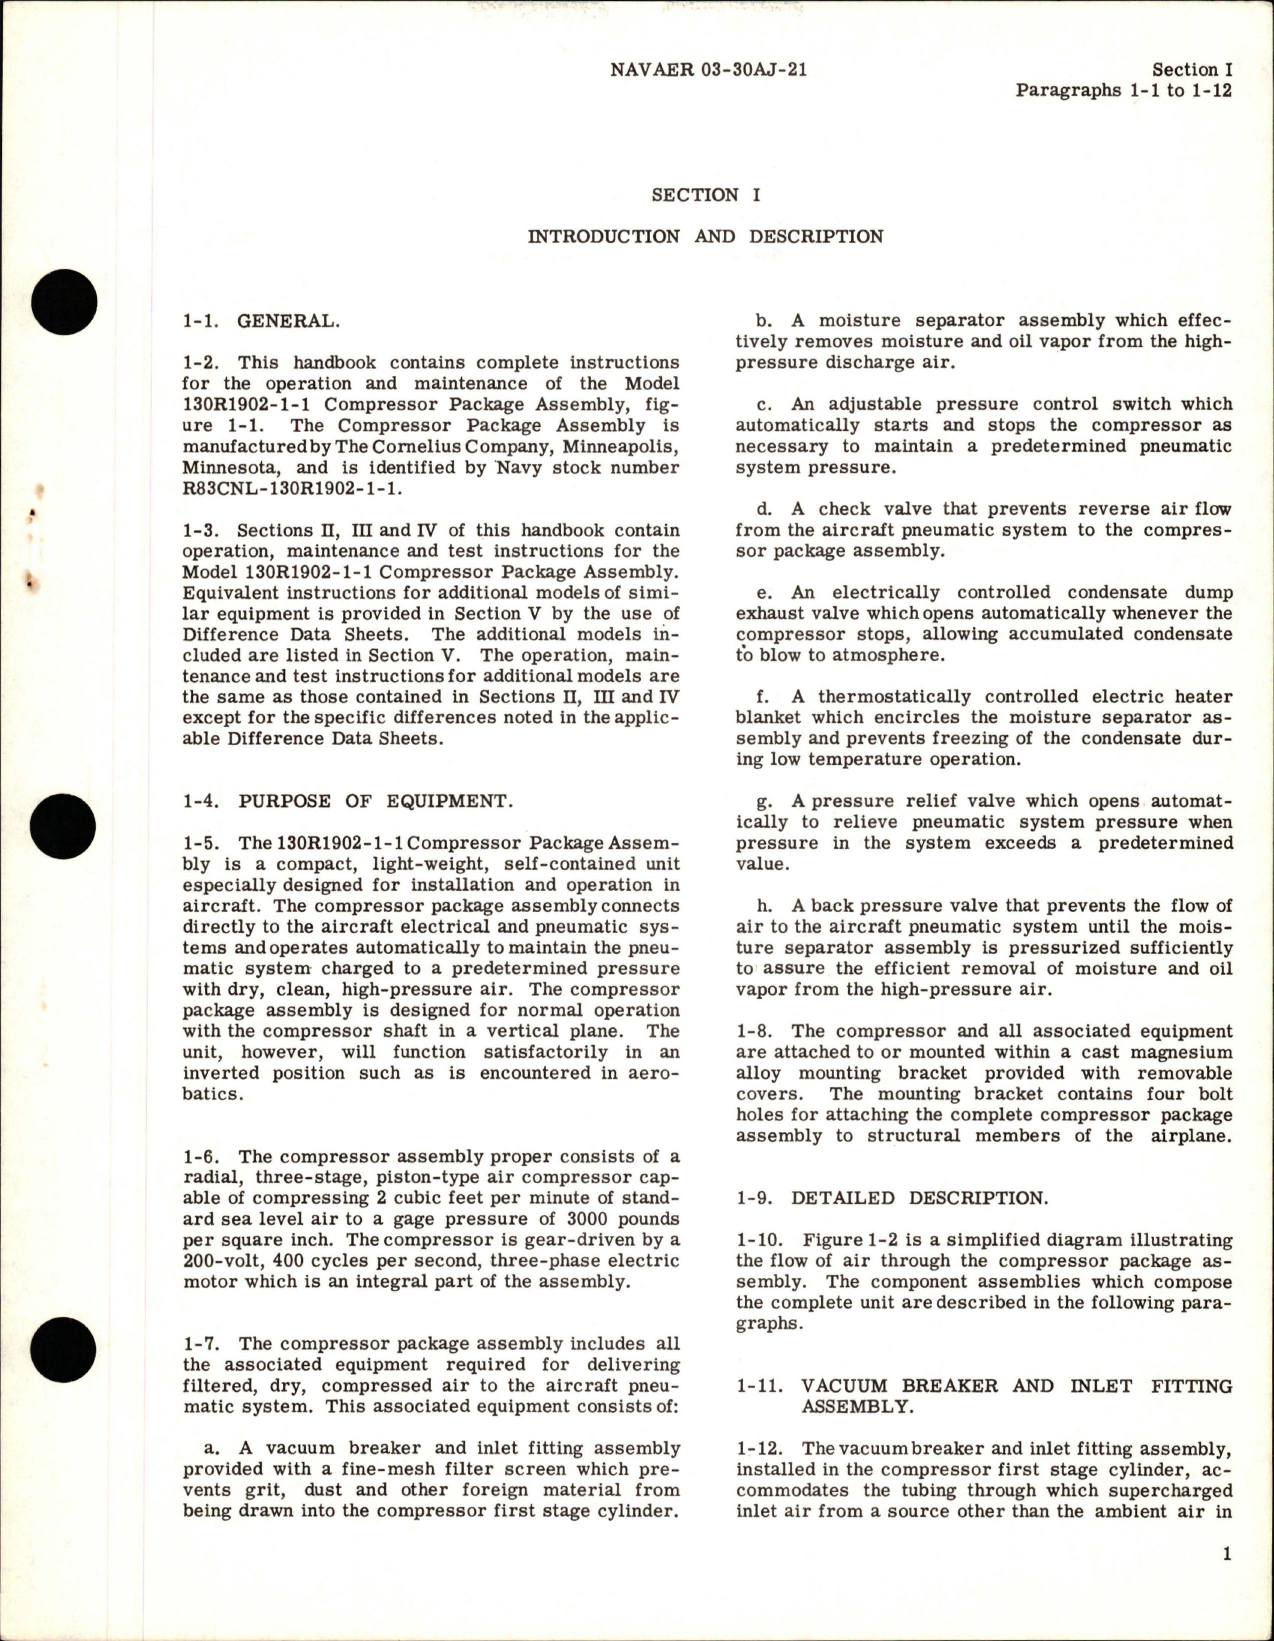 Sample page 5 from AirCorps Library document: Operation and Maintenance Instructions for Compressor Package Assembly - Models 130R1902 and 130R1902-1-1